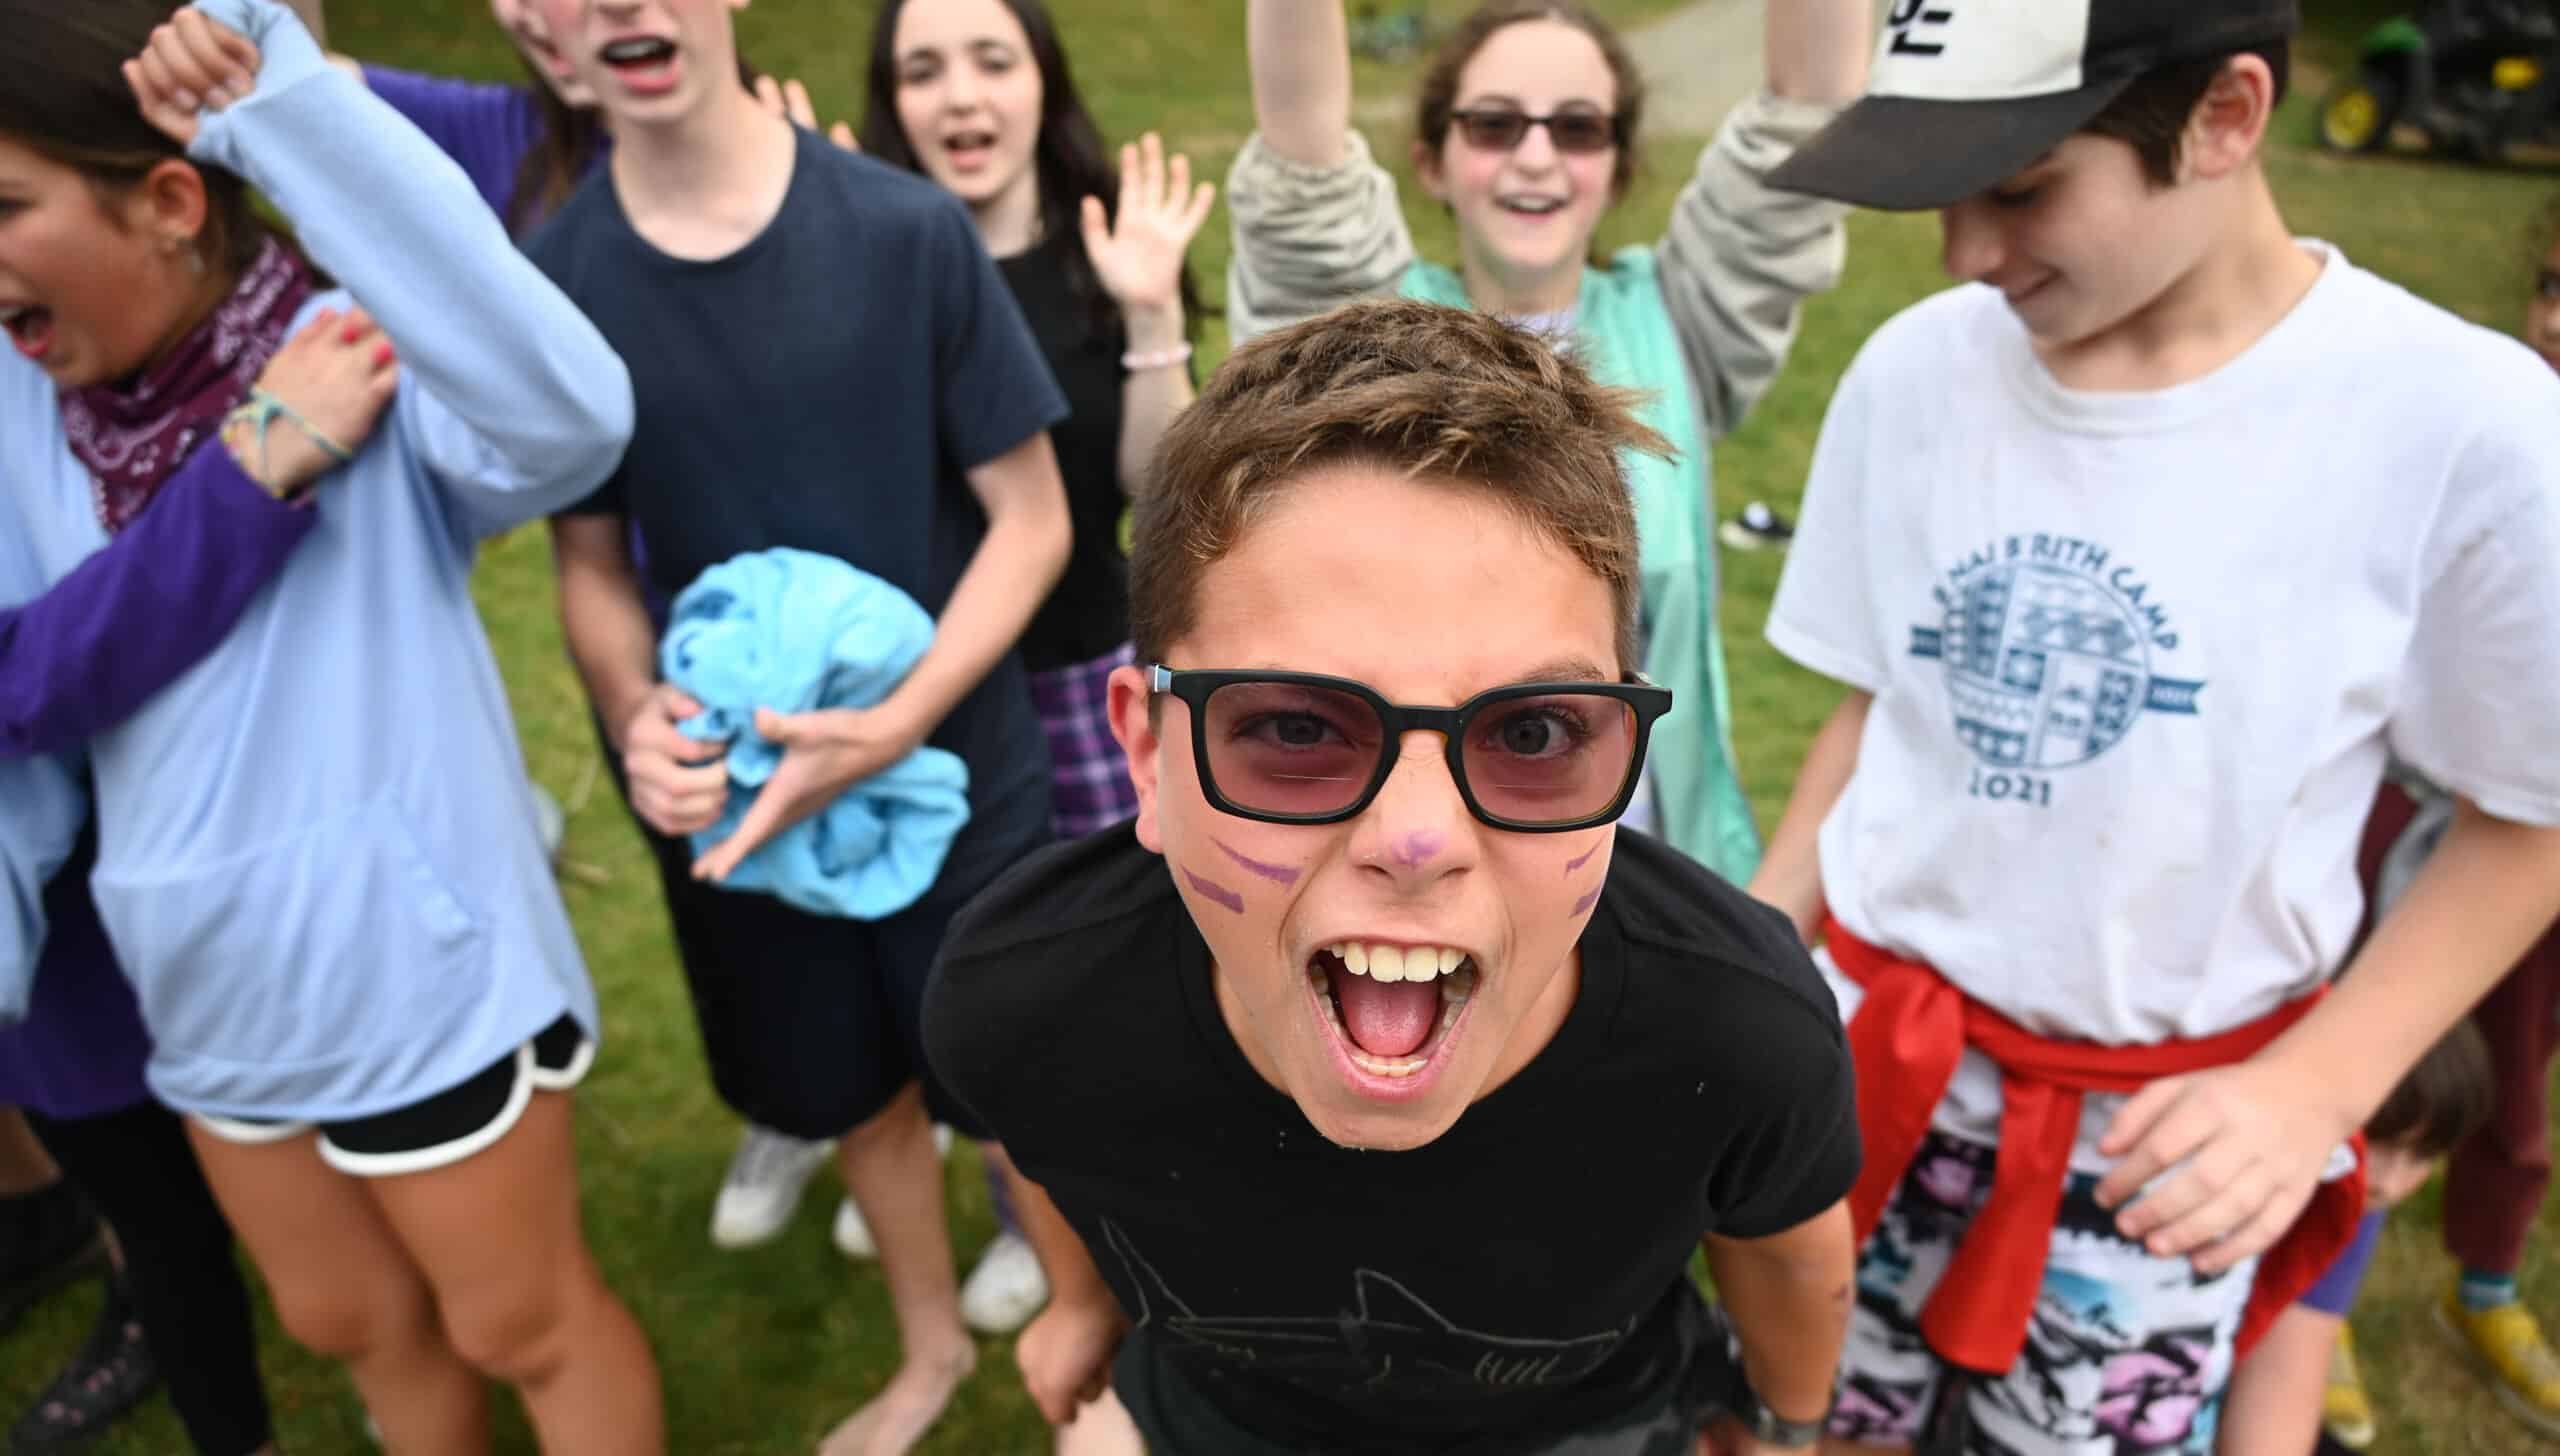 A camper with sunglasses cheering.